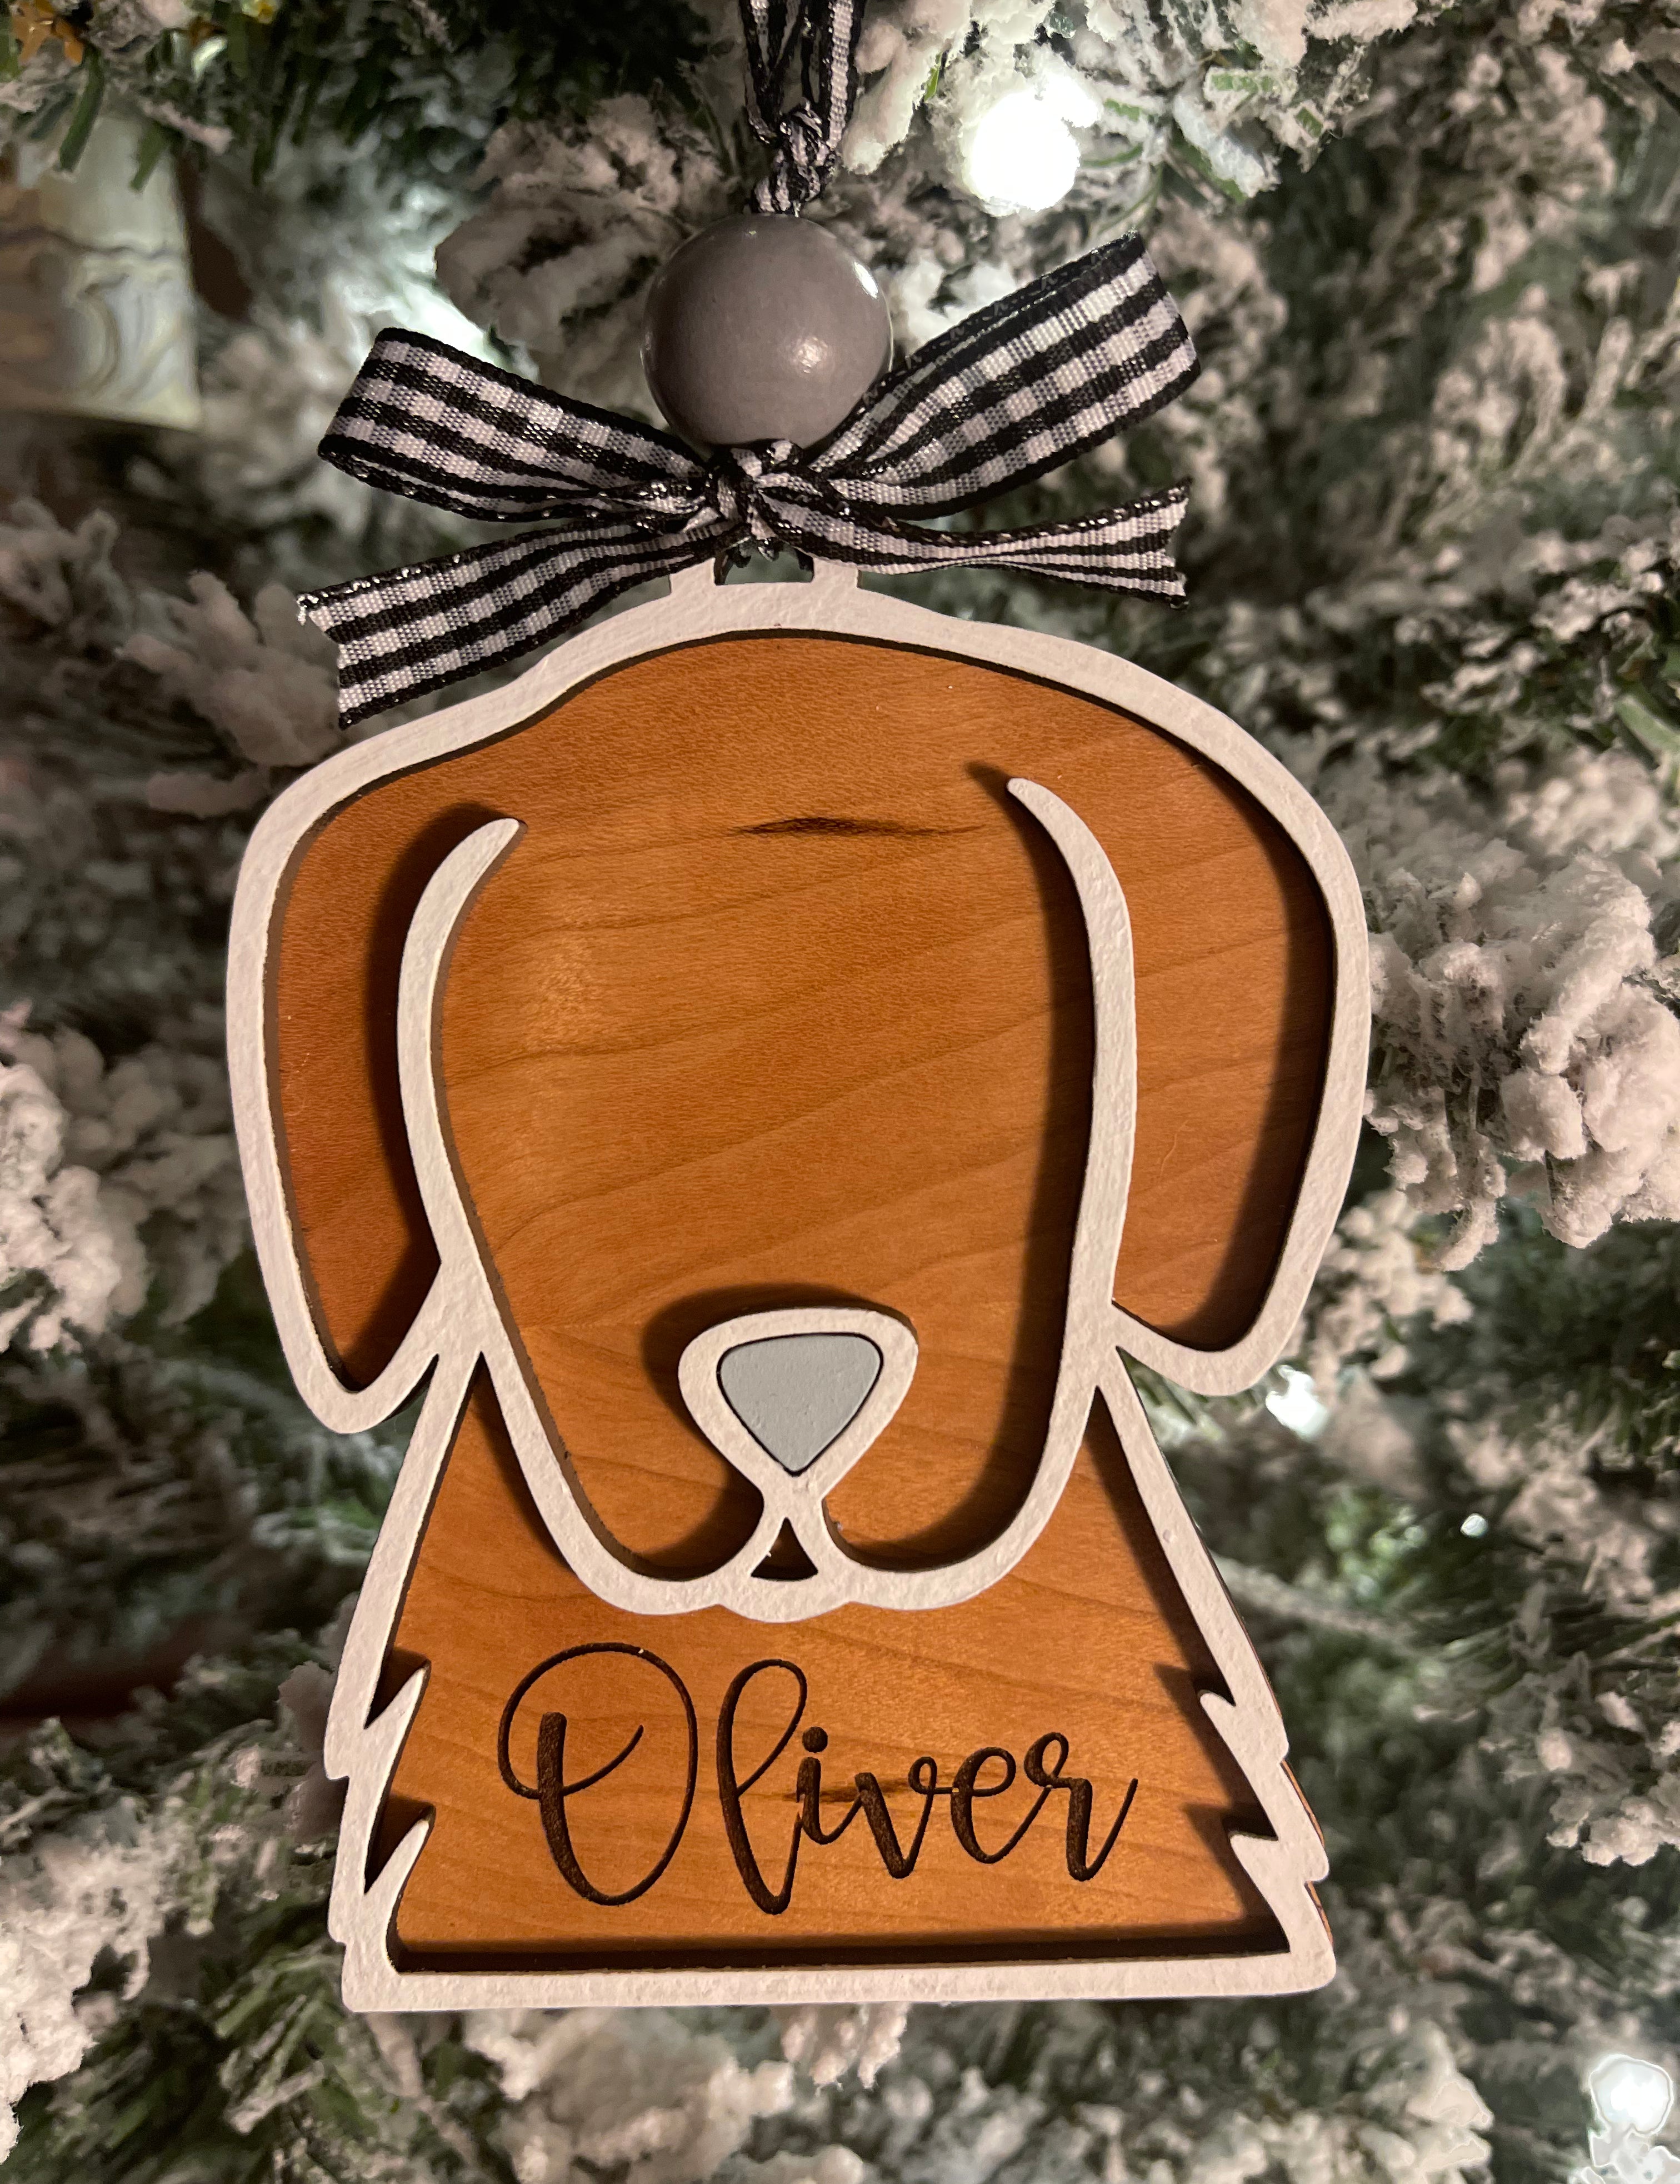 This is the dog ornament with an engraved name.